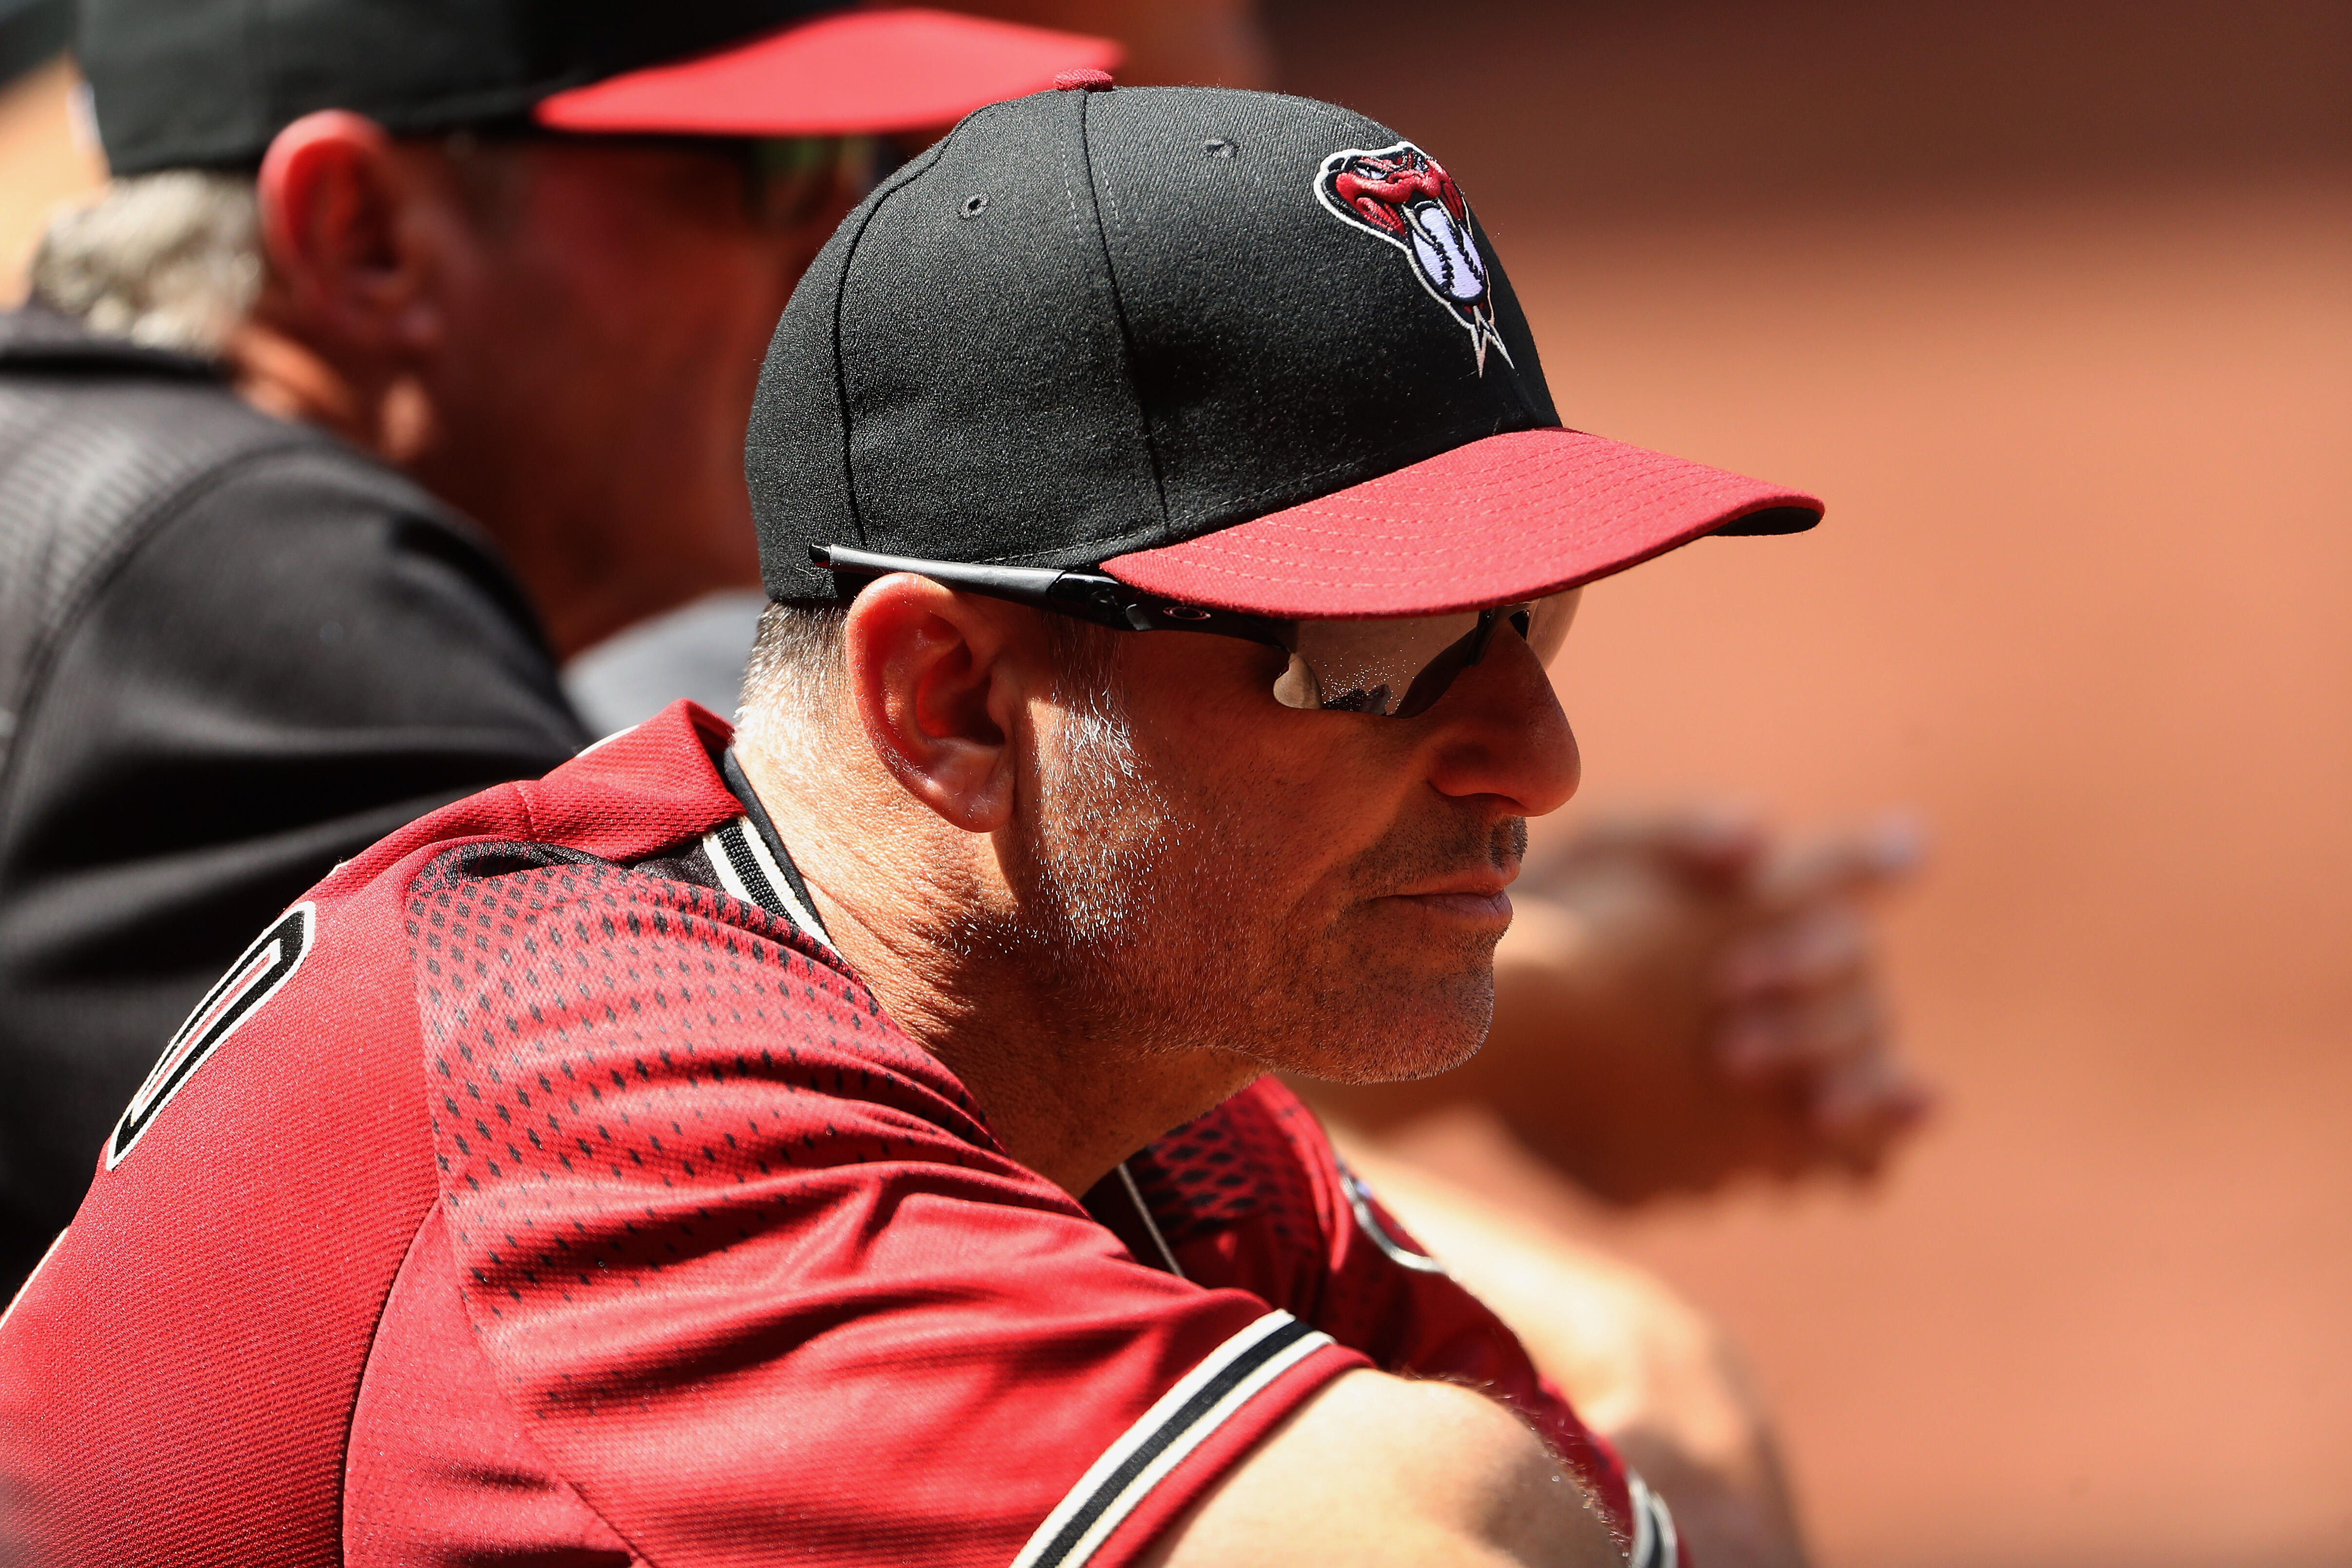 PHOENIX, AZ - APRIL 09:  Manager Torey Lovullo #17 of the Arizona Diamondbacks watches from the dugout during the fourth inning of the MLB game against the Cleveland Indians at Chase Field on April 9, 2017 in Phoenix, Arizona.  (Photo by Christian Peterse